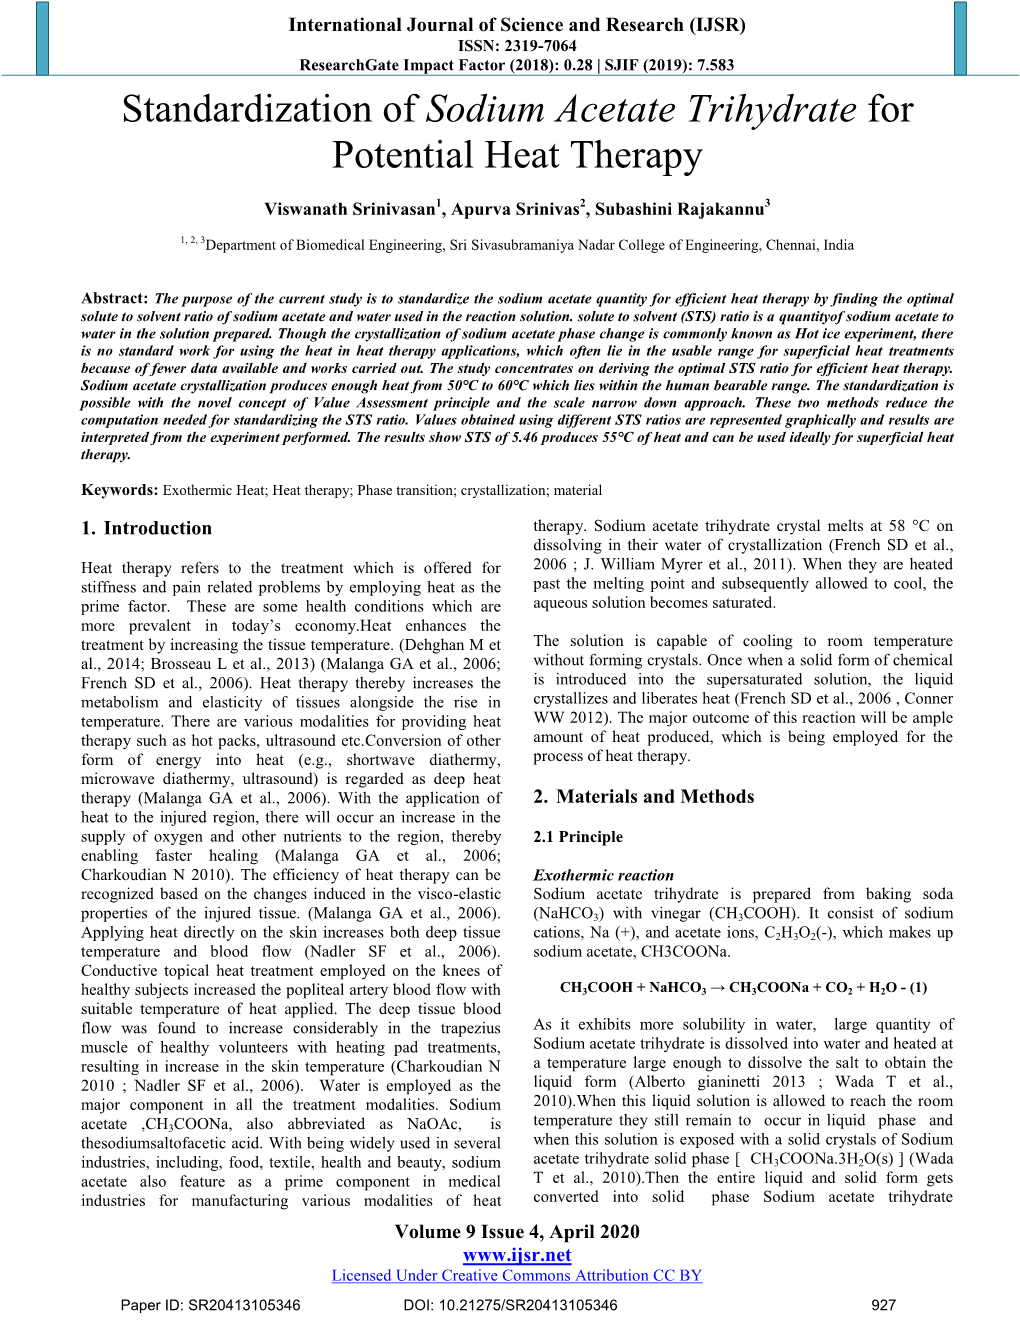 Standardization of Sodium Acetate Trihydrate for Potential Heat Therapy